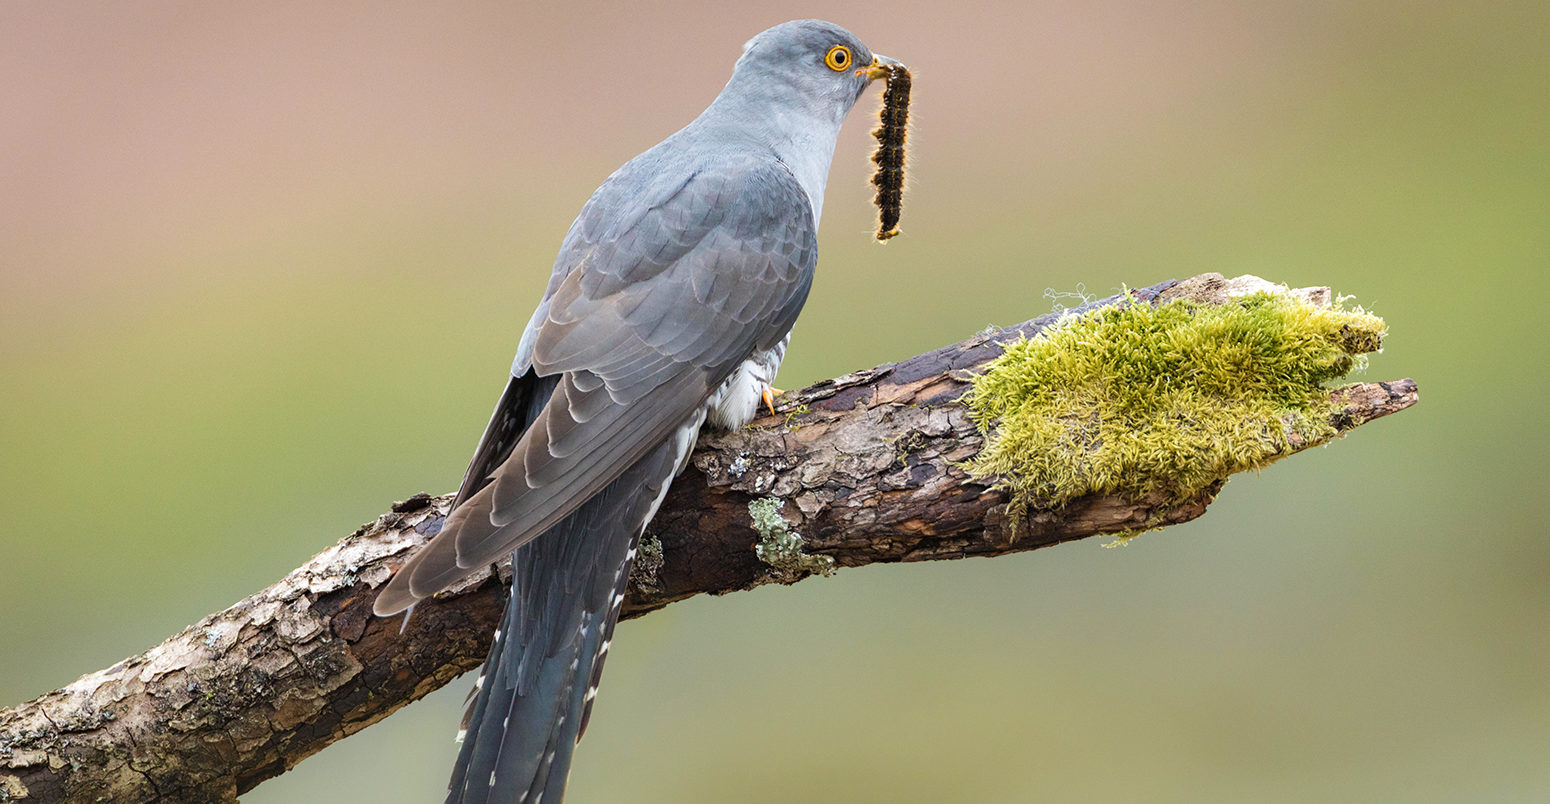 J3YNRW Male Cuckoo (Cuculus canorus) perched on a branch feeding on a caterpillar in the Brecon Beacons, Wales, UK